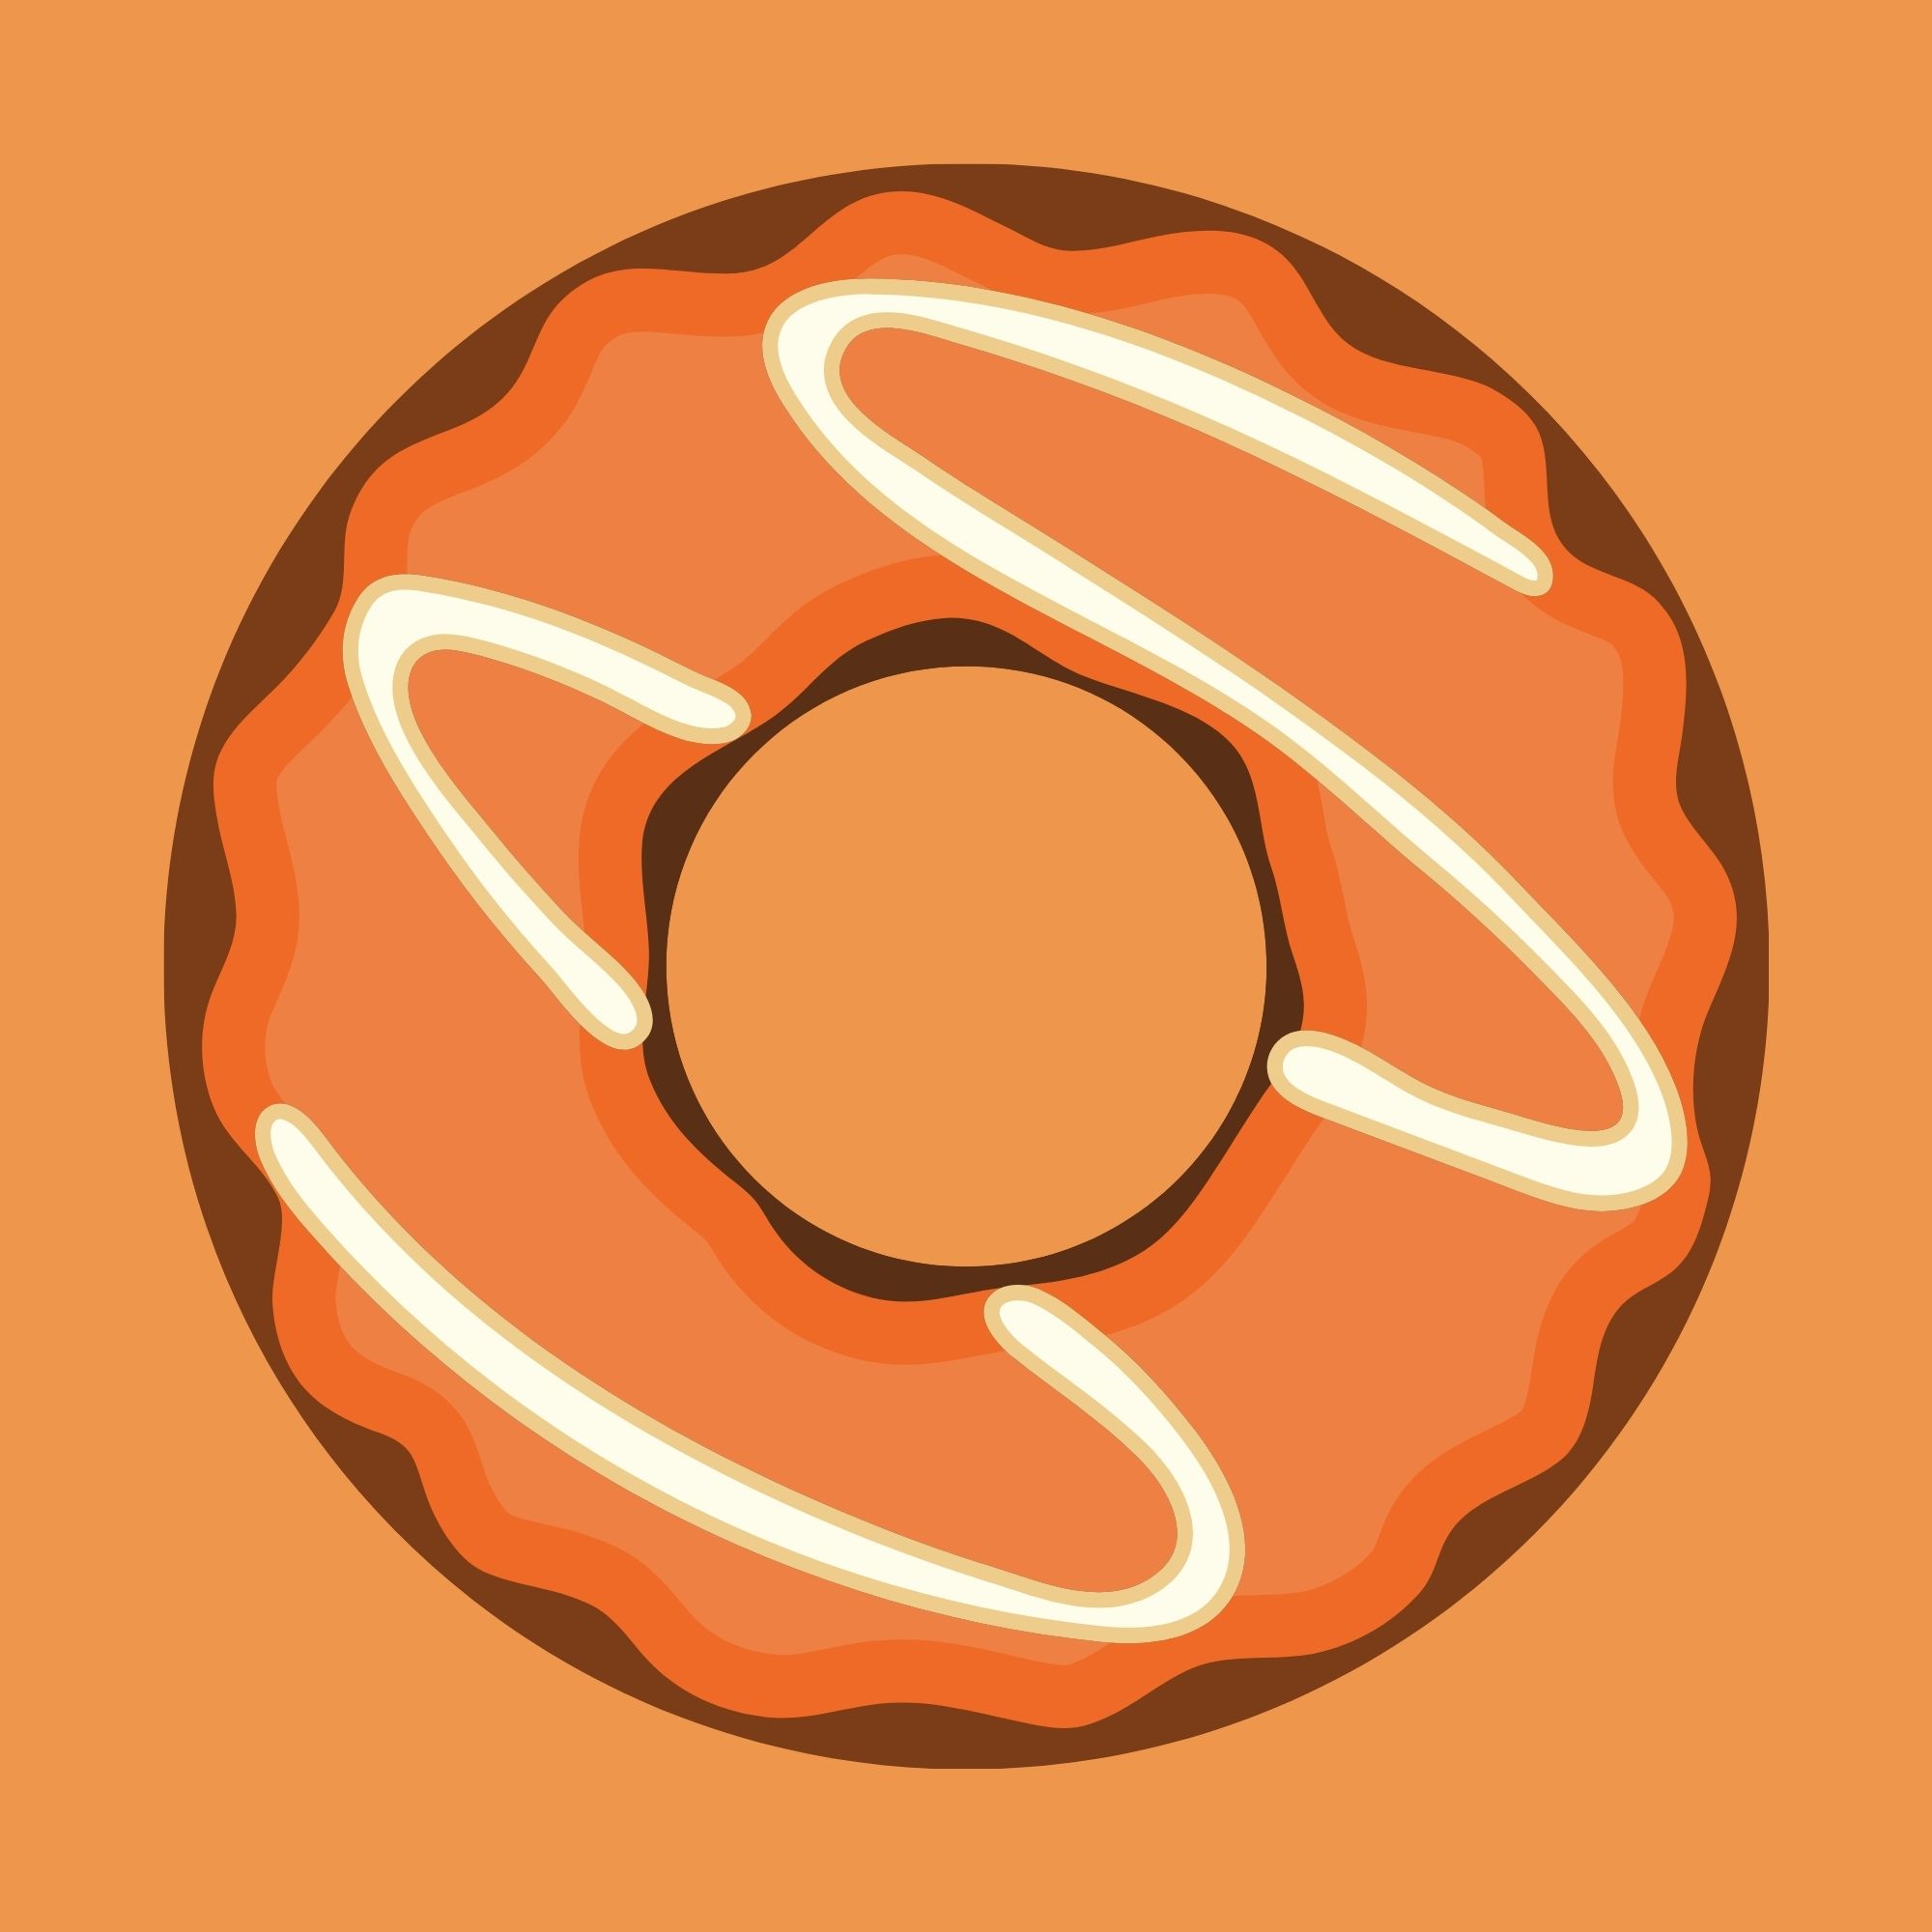 Donut #44 - Poly Donuts